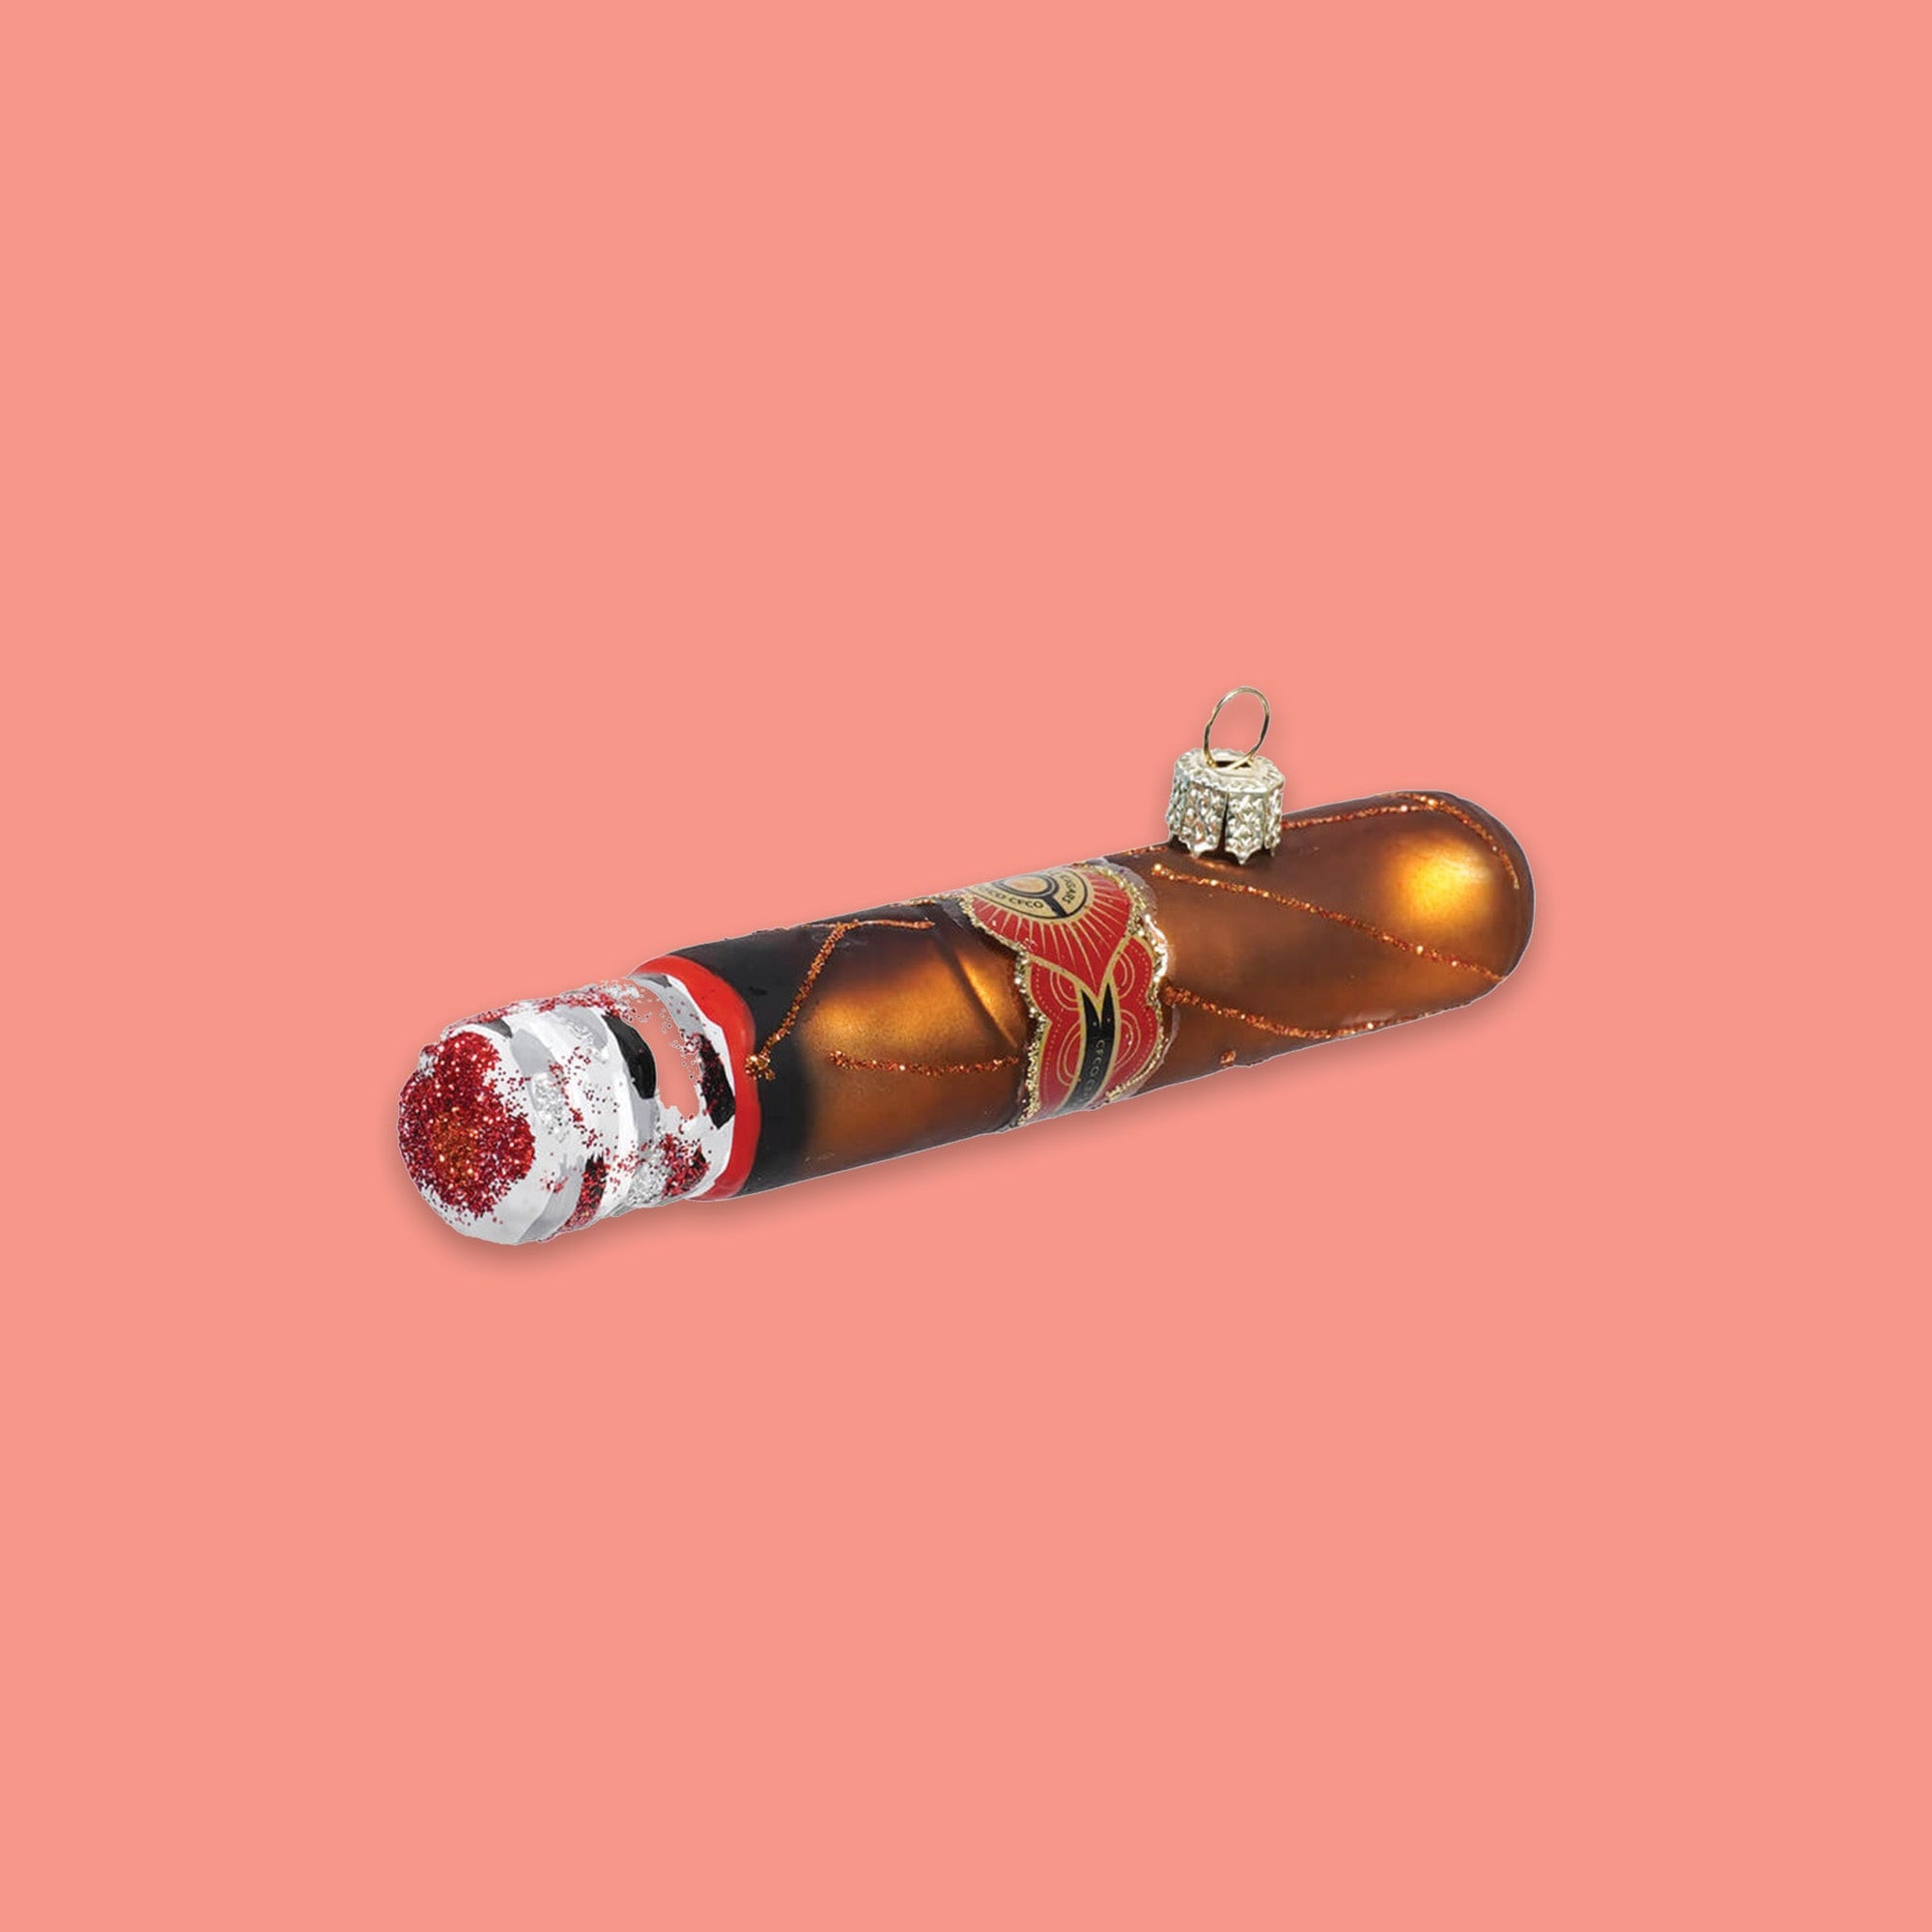 On a coral pink background sits a cigar ornament. This glass ornament looks like a real cigar with brown paper and red glitter at the end.